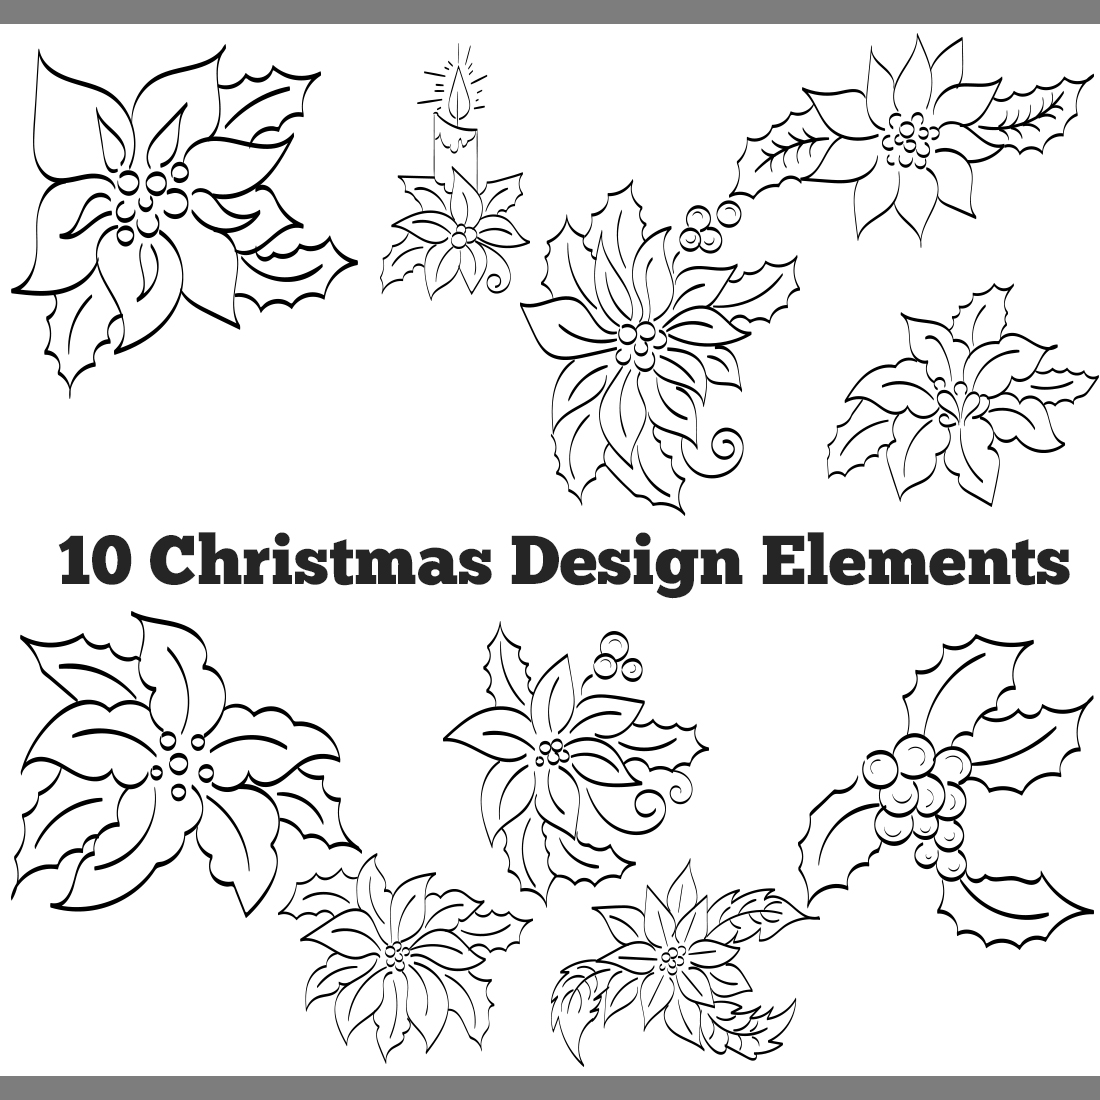 Christmas Elements Graphics Design cover image.